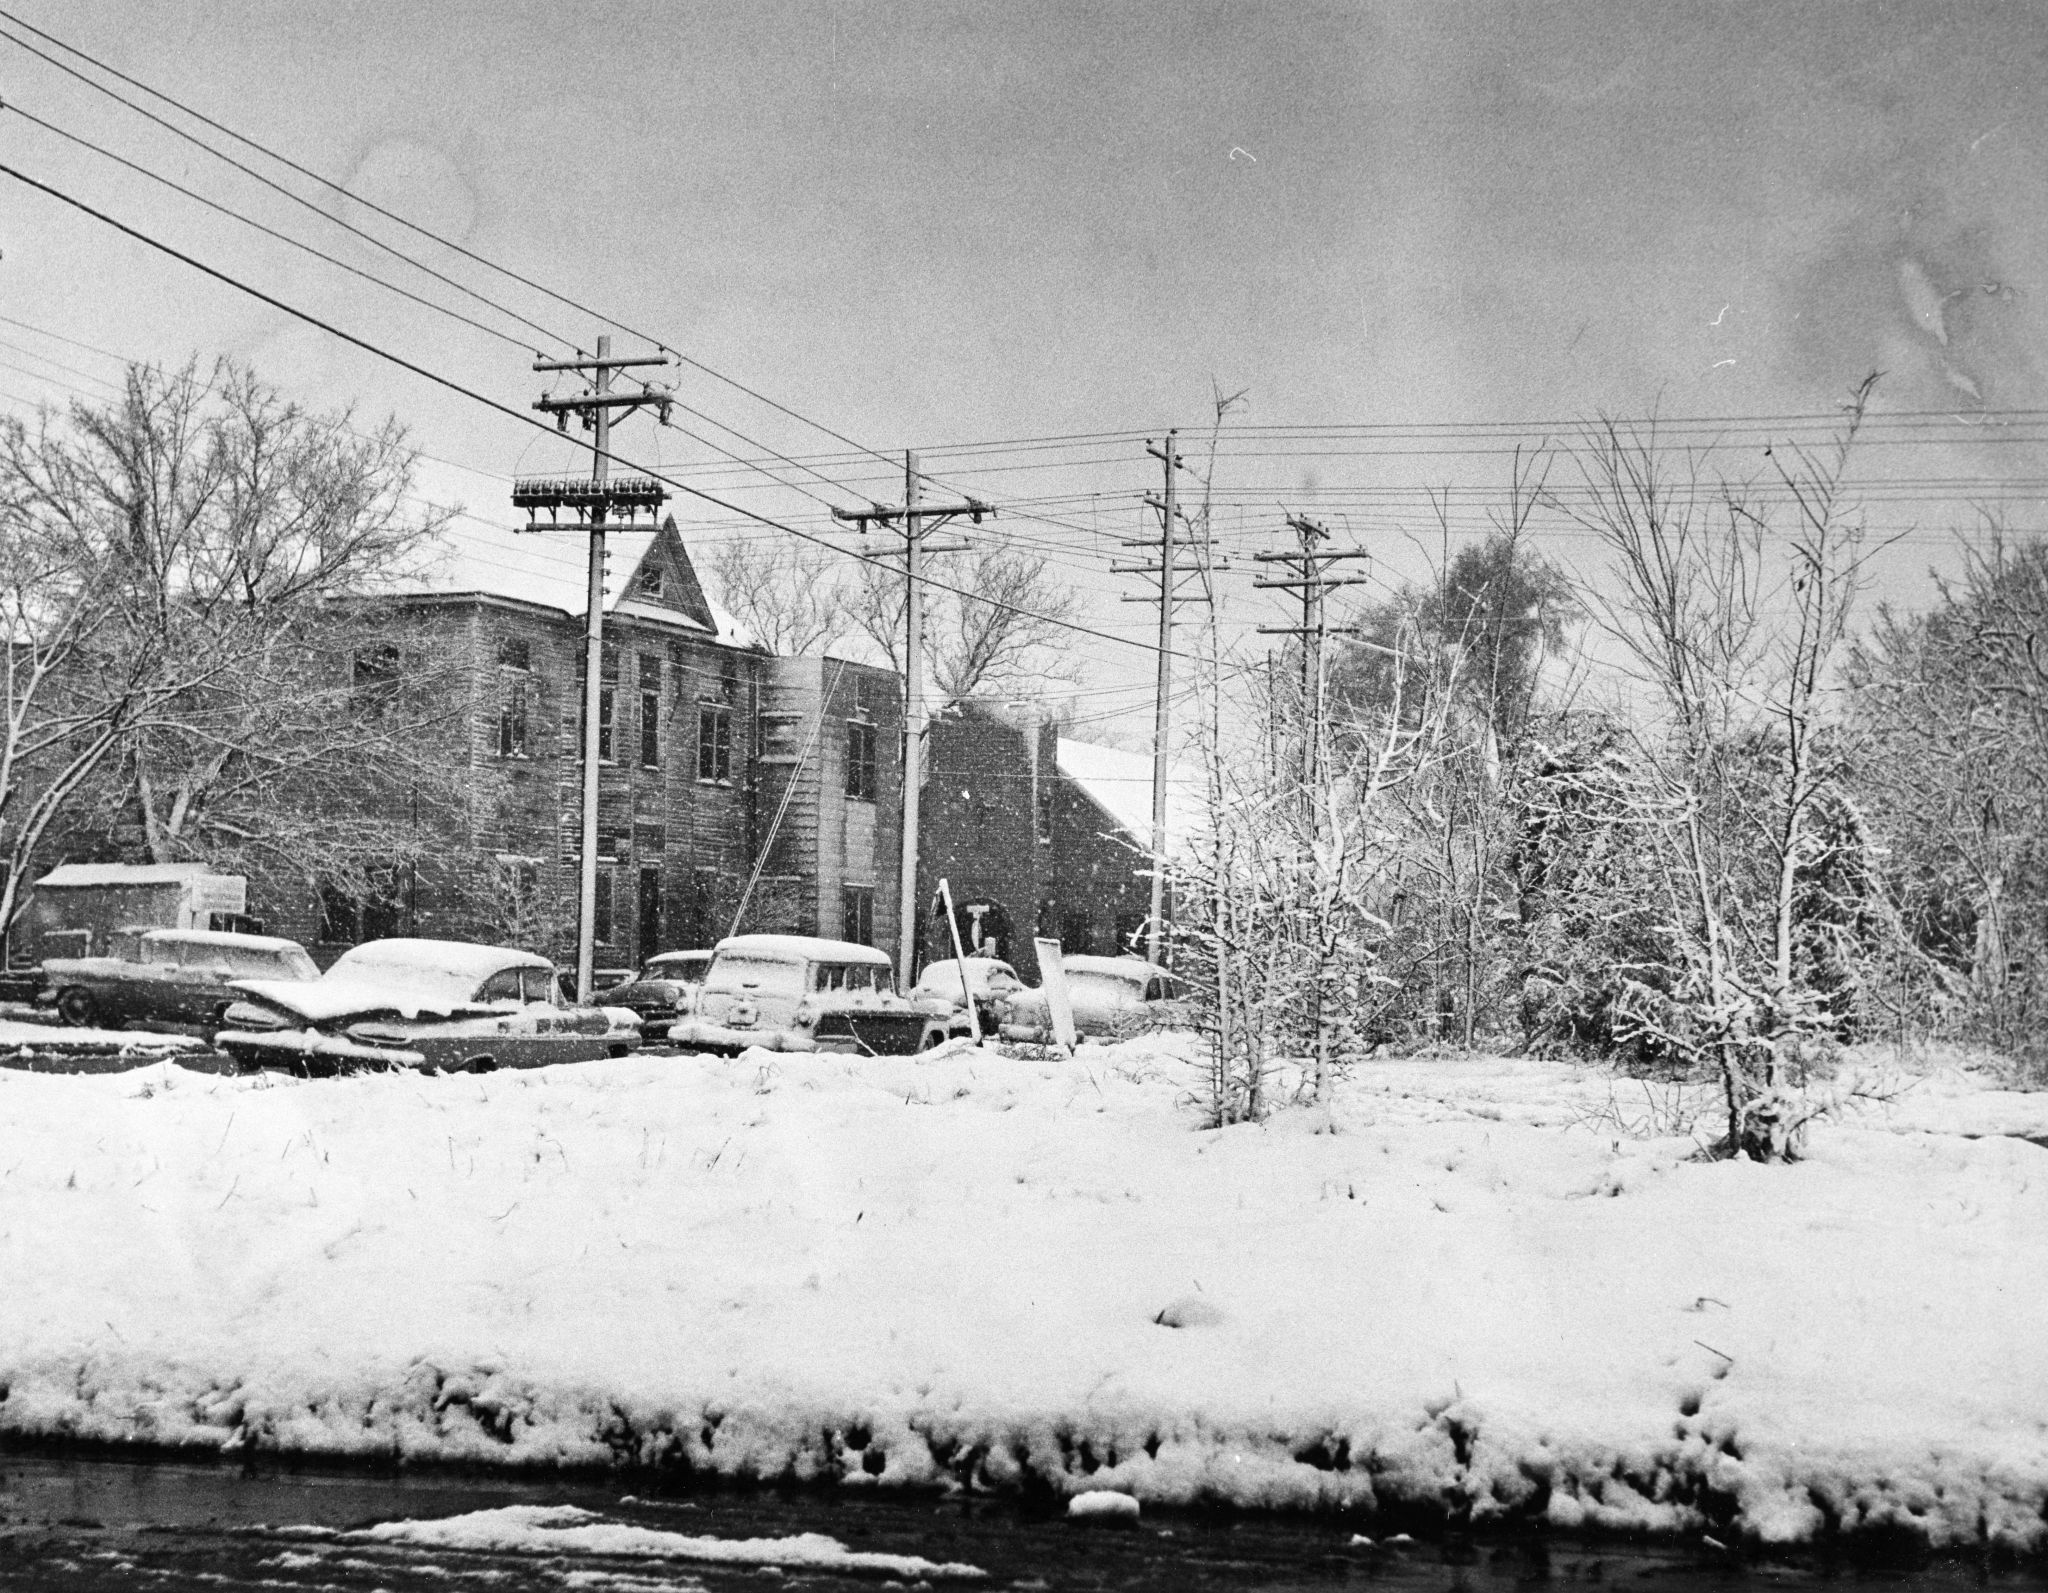 58 years ago this week Houston got four inches of snow just before Valentine's Day ...